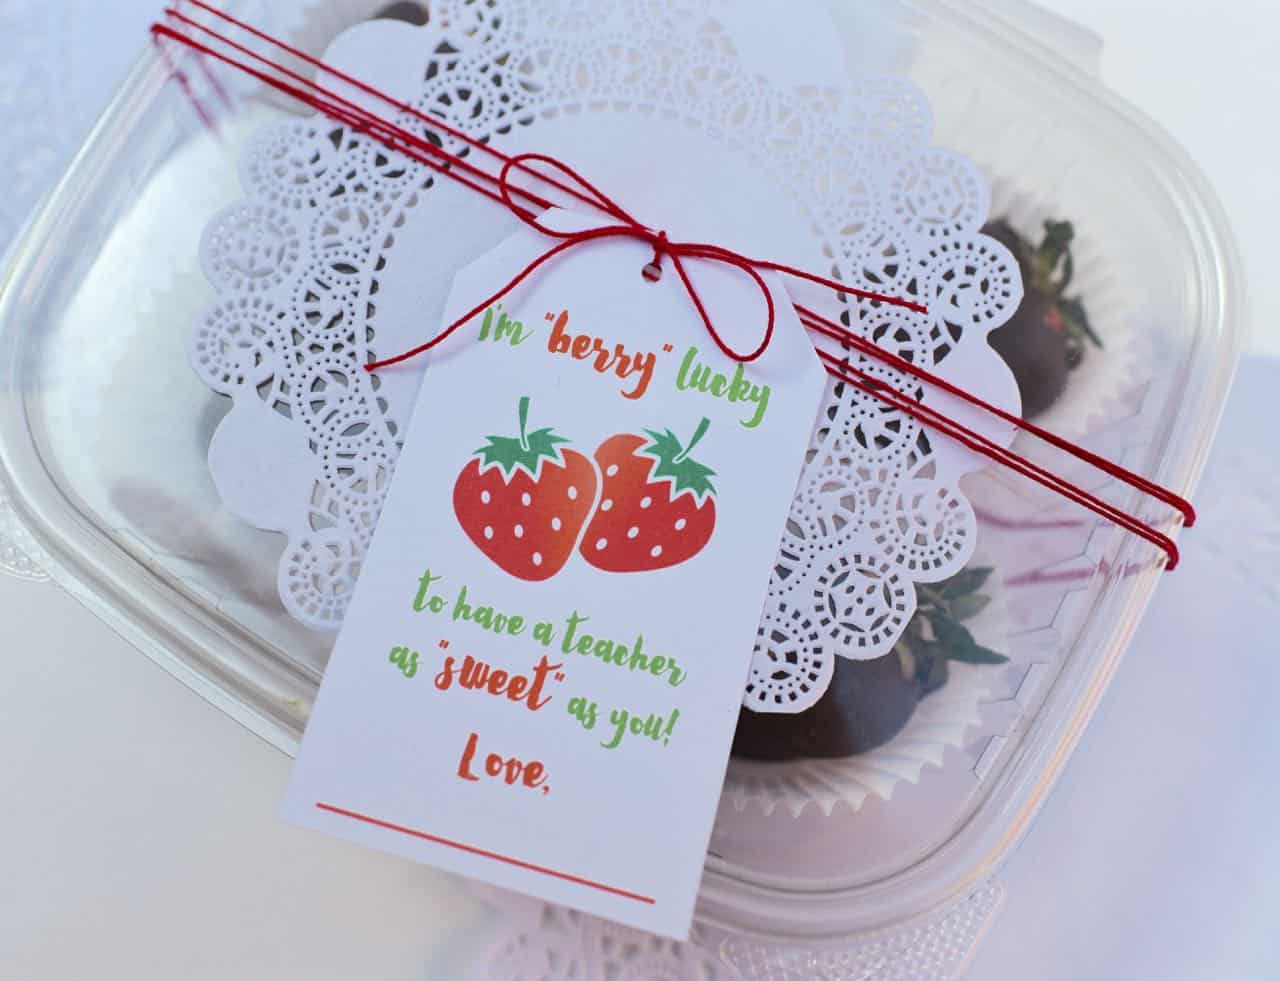 berry lucky gift tag